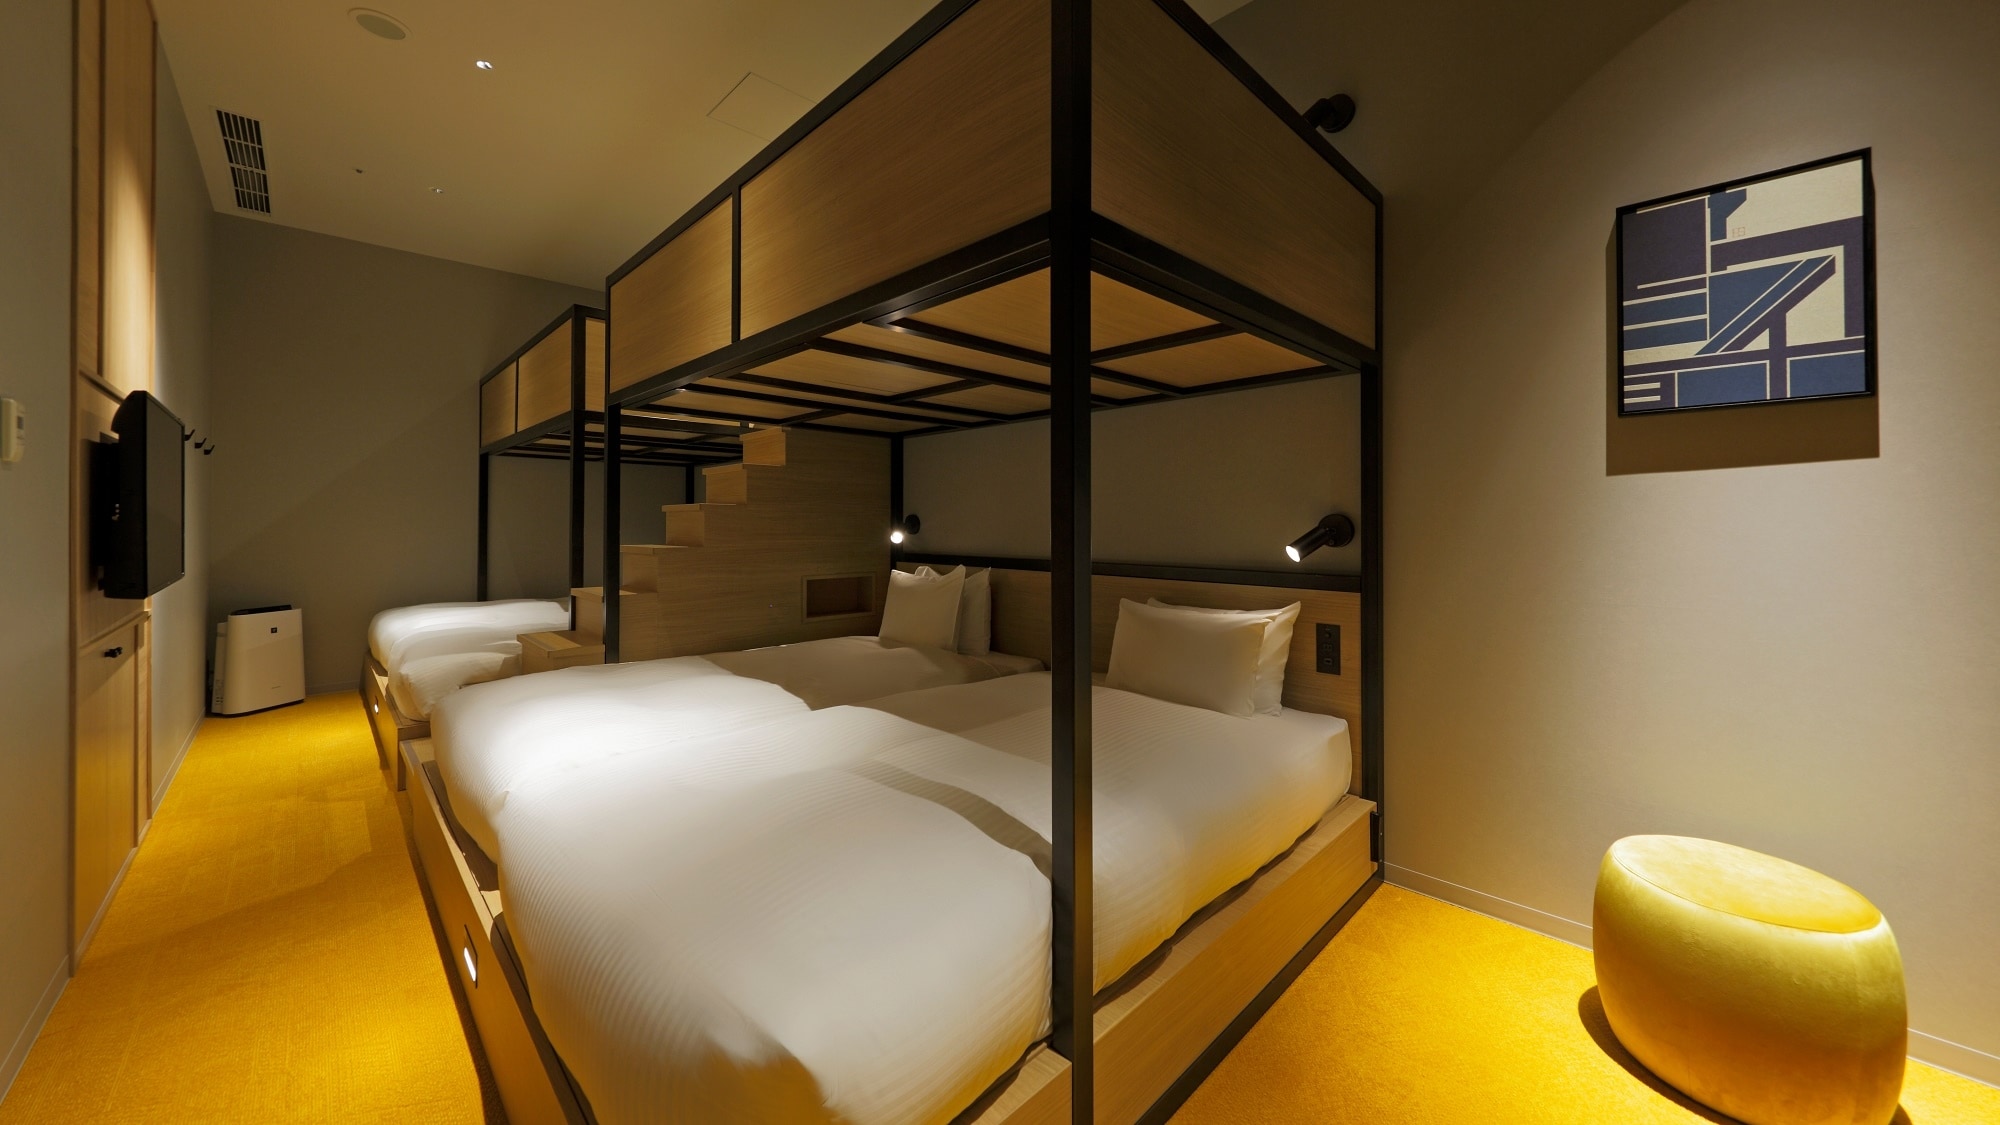 ◆Aoi Bank Bedroom｜A room with 6 bunk beds.